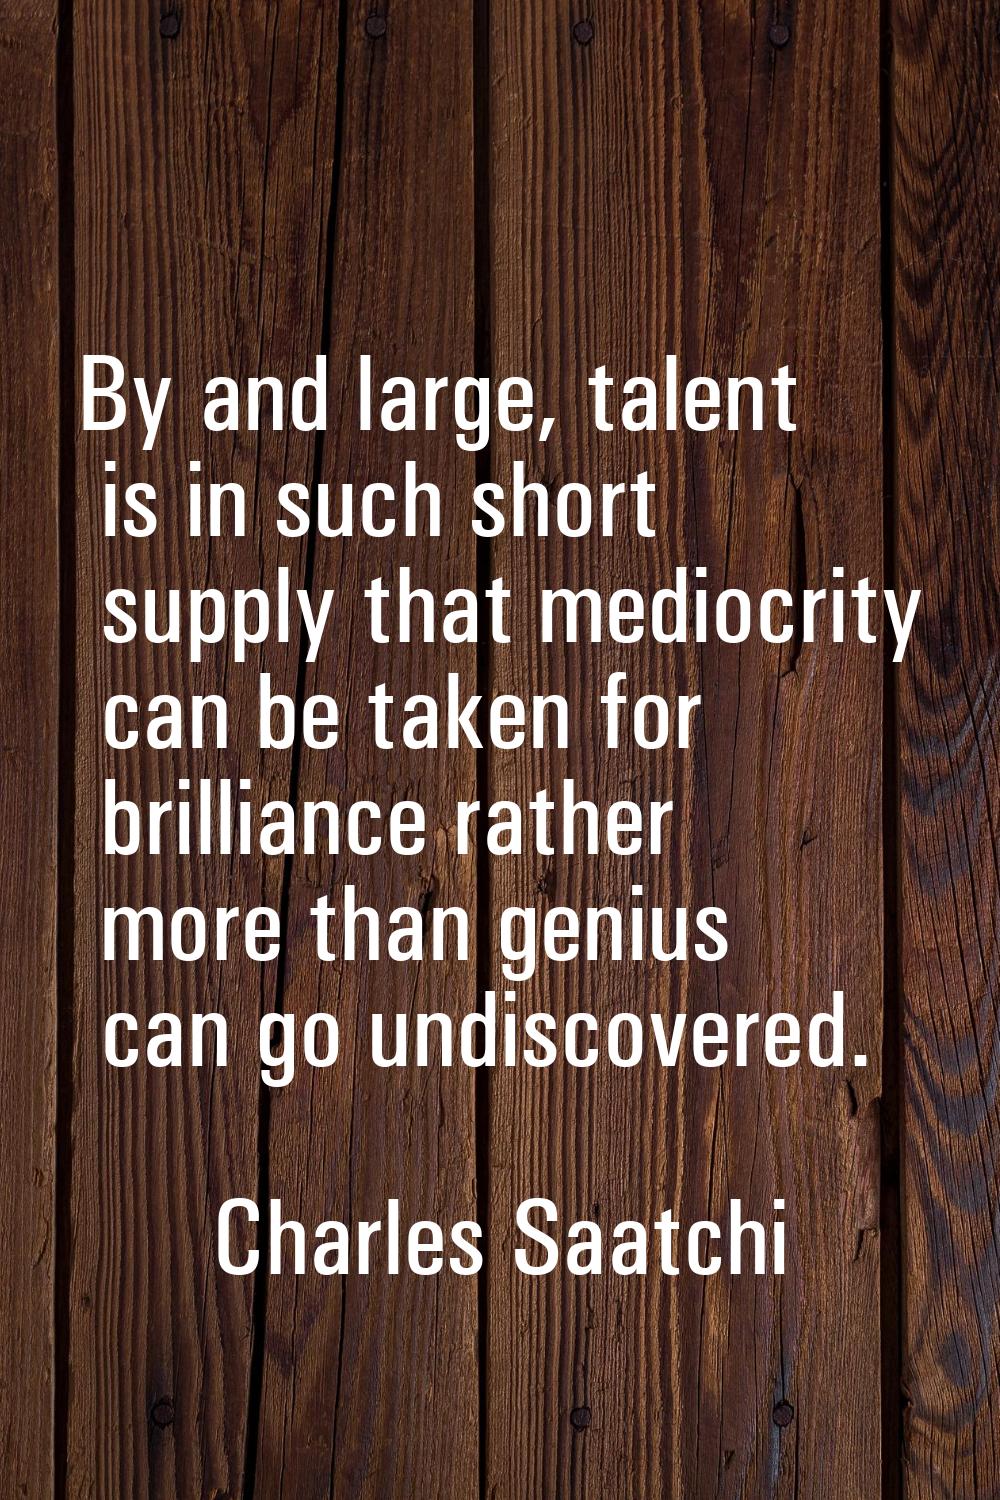 By and large, talent is in such short supply that mediocrity can be taken for brilliance rather mor